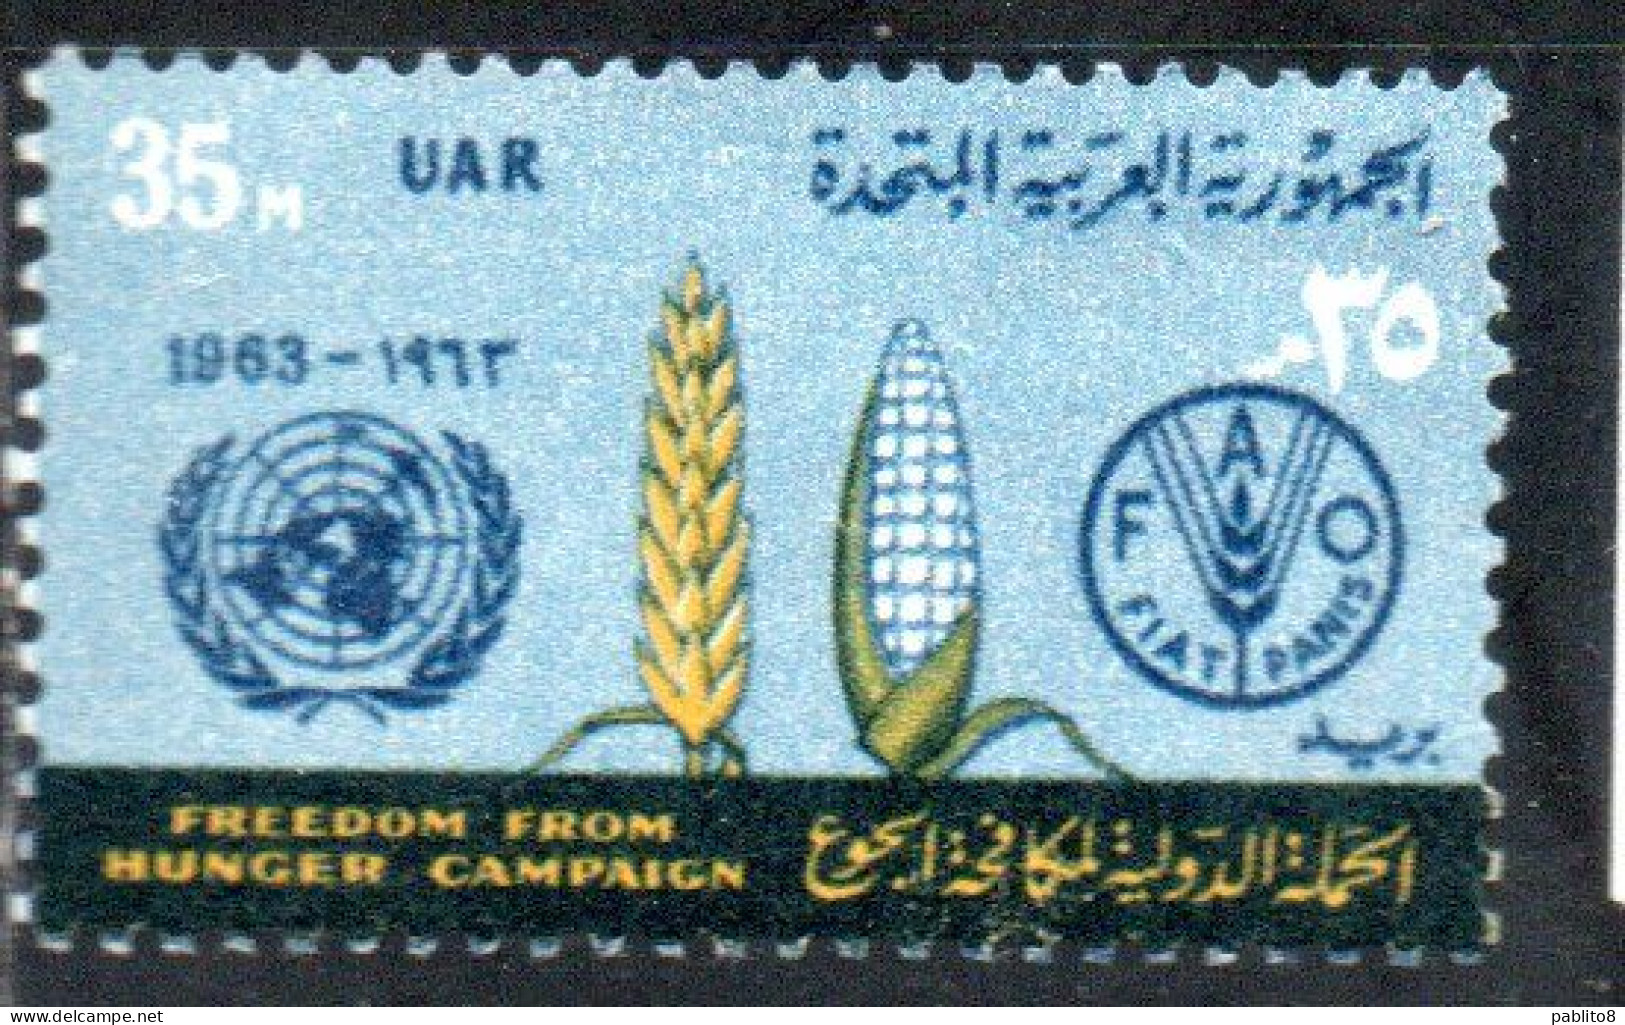 UAR EGYPT EGITTO 1963 FAO FREEDOM FROM HUNGER CAMPAIGN WHEAT CORN AND EMBLEMS 35m  MNH - Nuevos